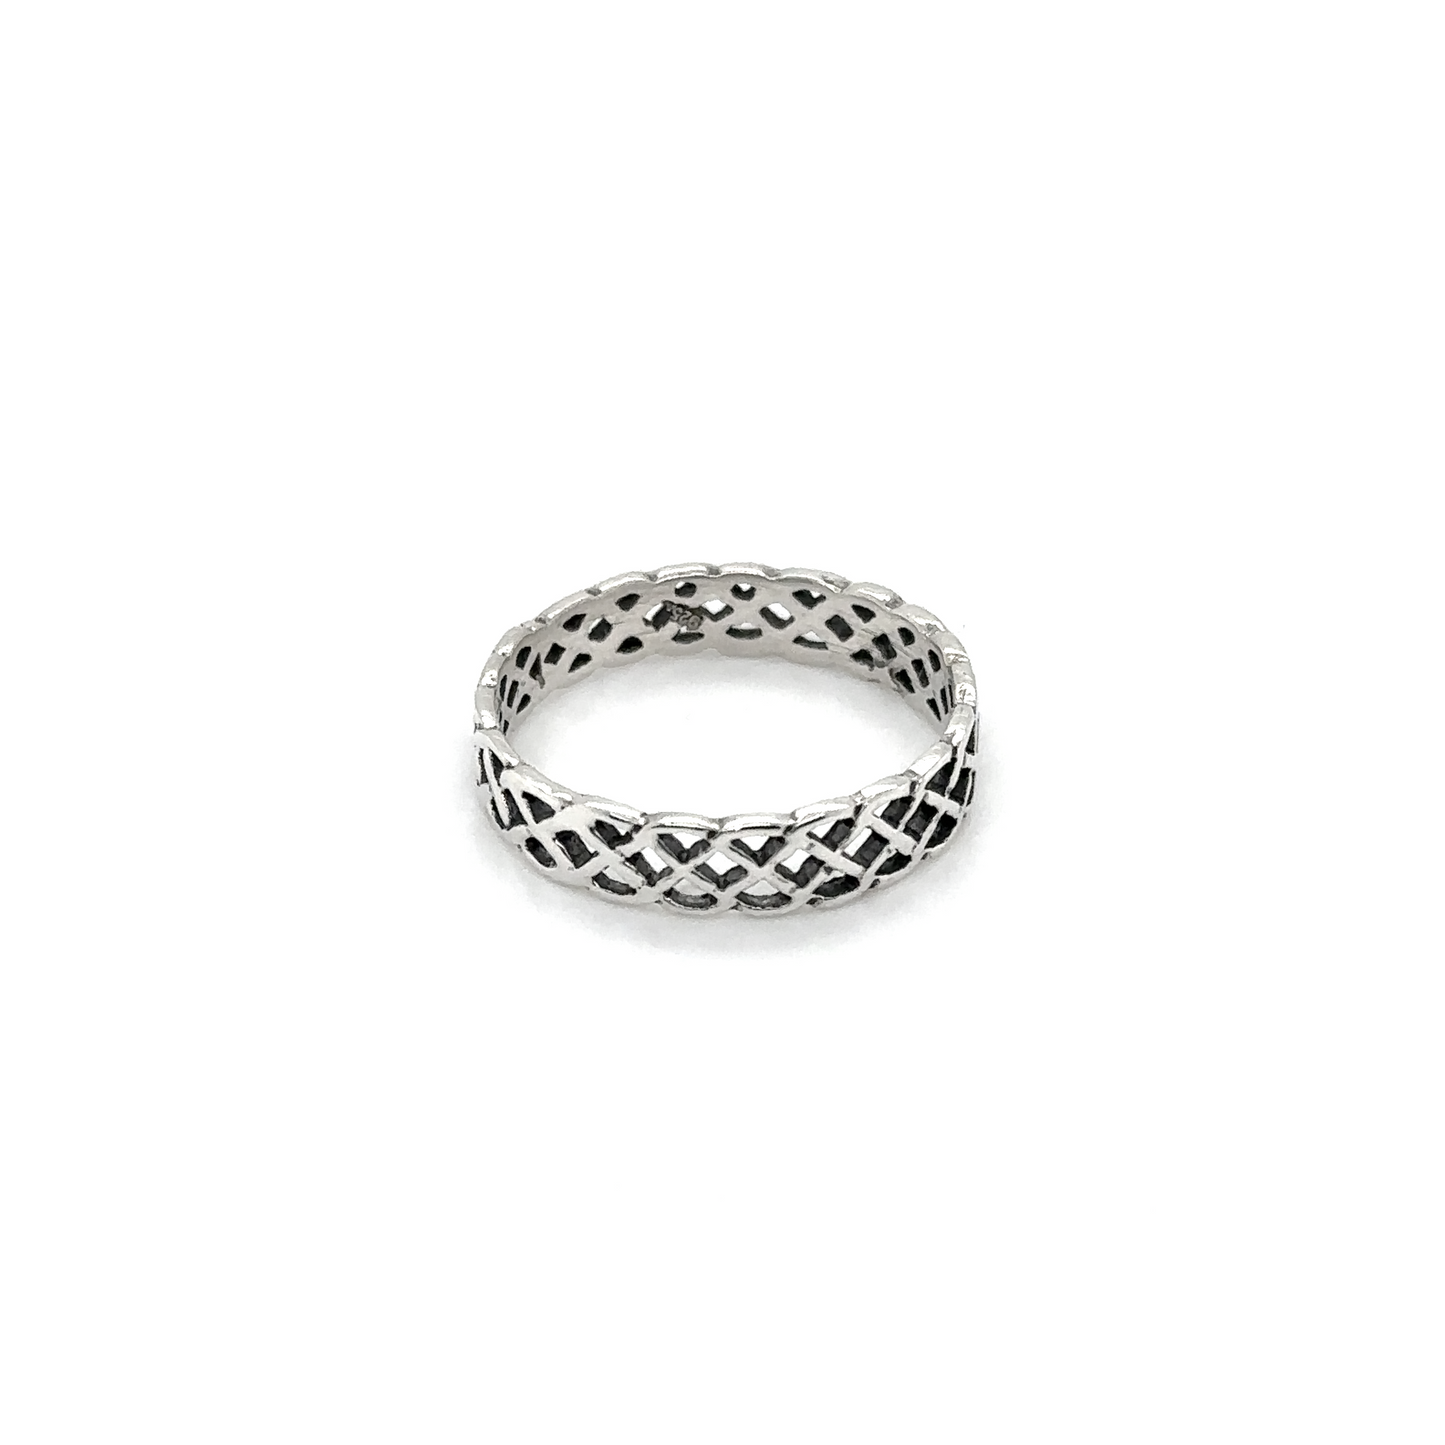 A 4mm Weave Band Ring with an intricate celtic design.